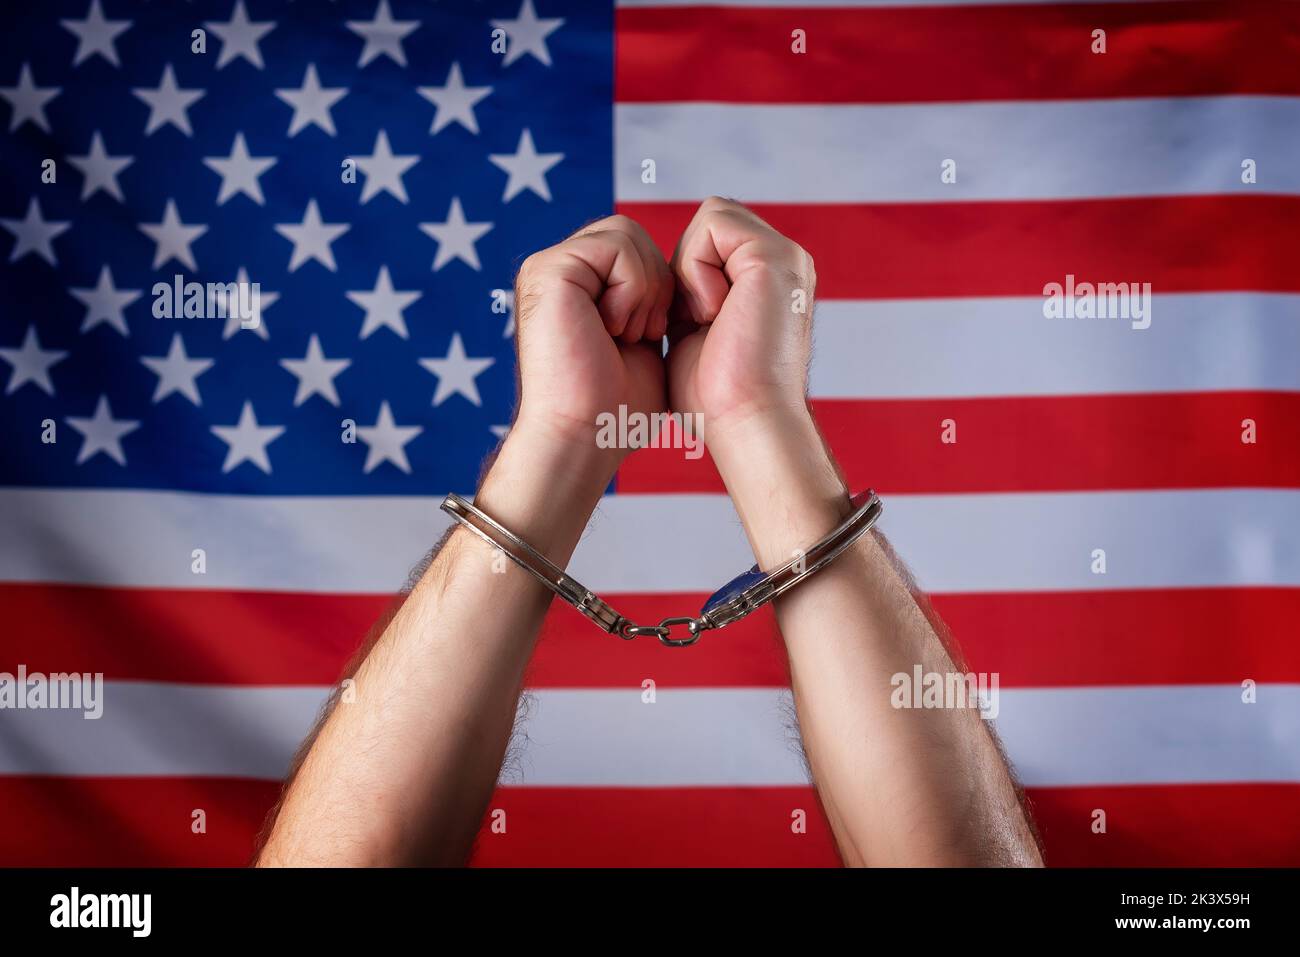 Handcuffed hands with the U.S. flag in the background. Condemned by the American financial system. Social and economic crisis Stock Photo